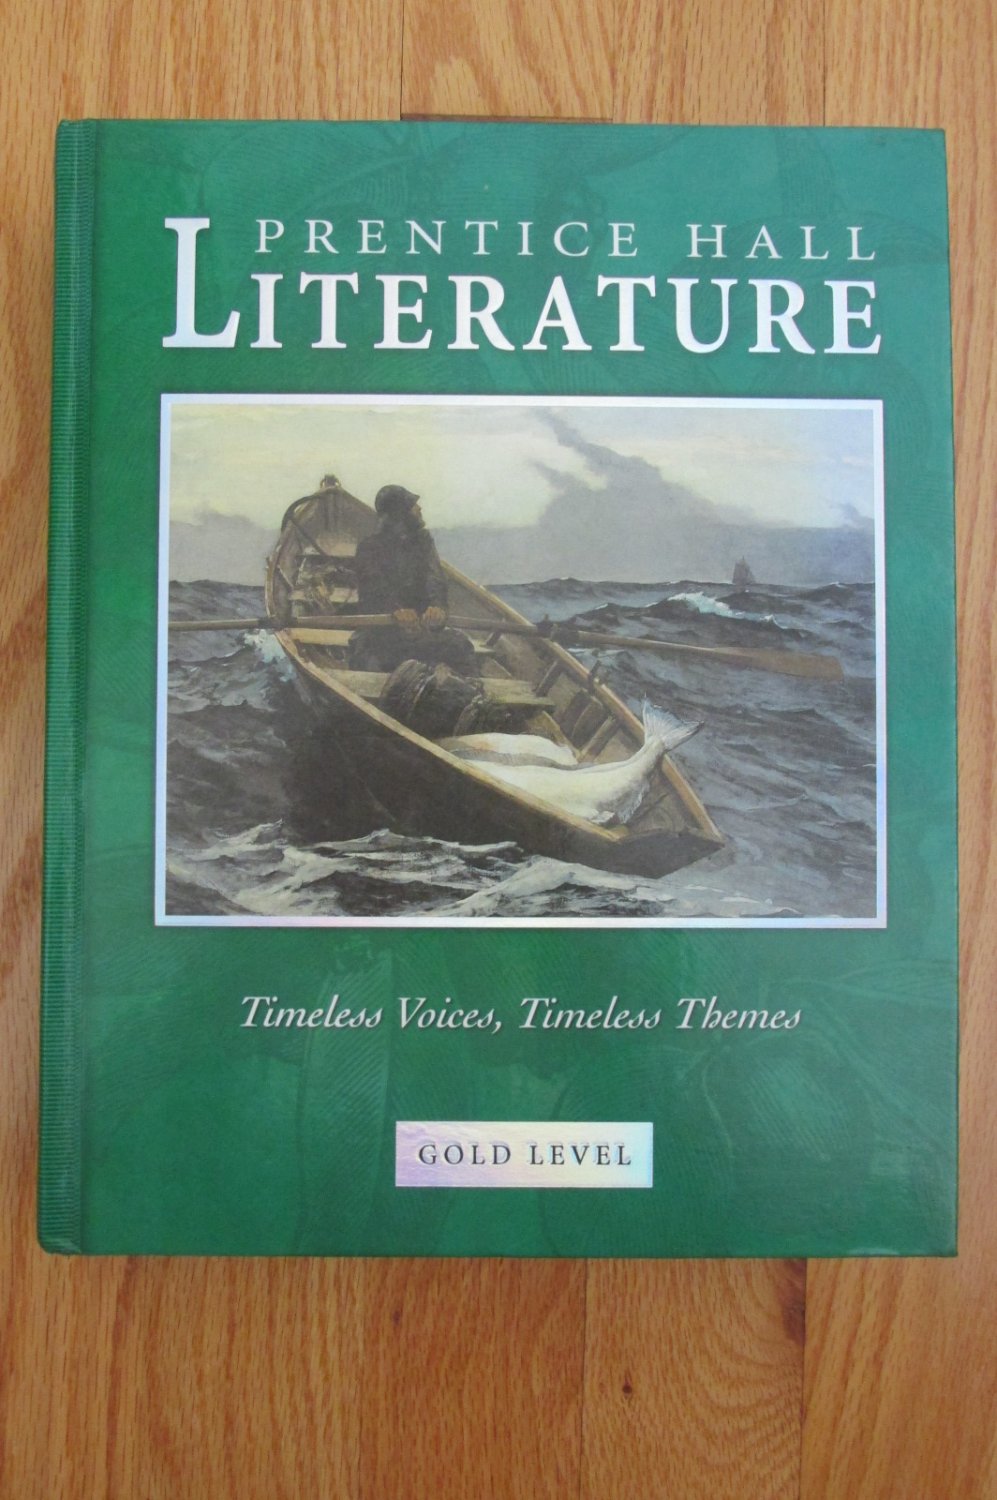 PRENTICE HALL LITERATURE TEXT BOOK GOLD LEVEL GRADE 9 HOME SCHOOL READER 2005 HC TIMELESS VOICES